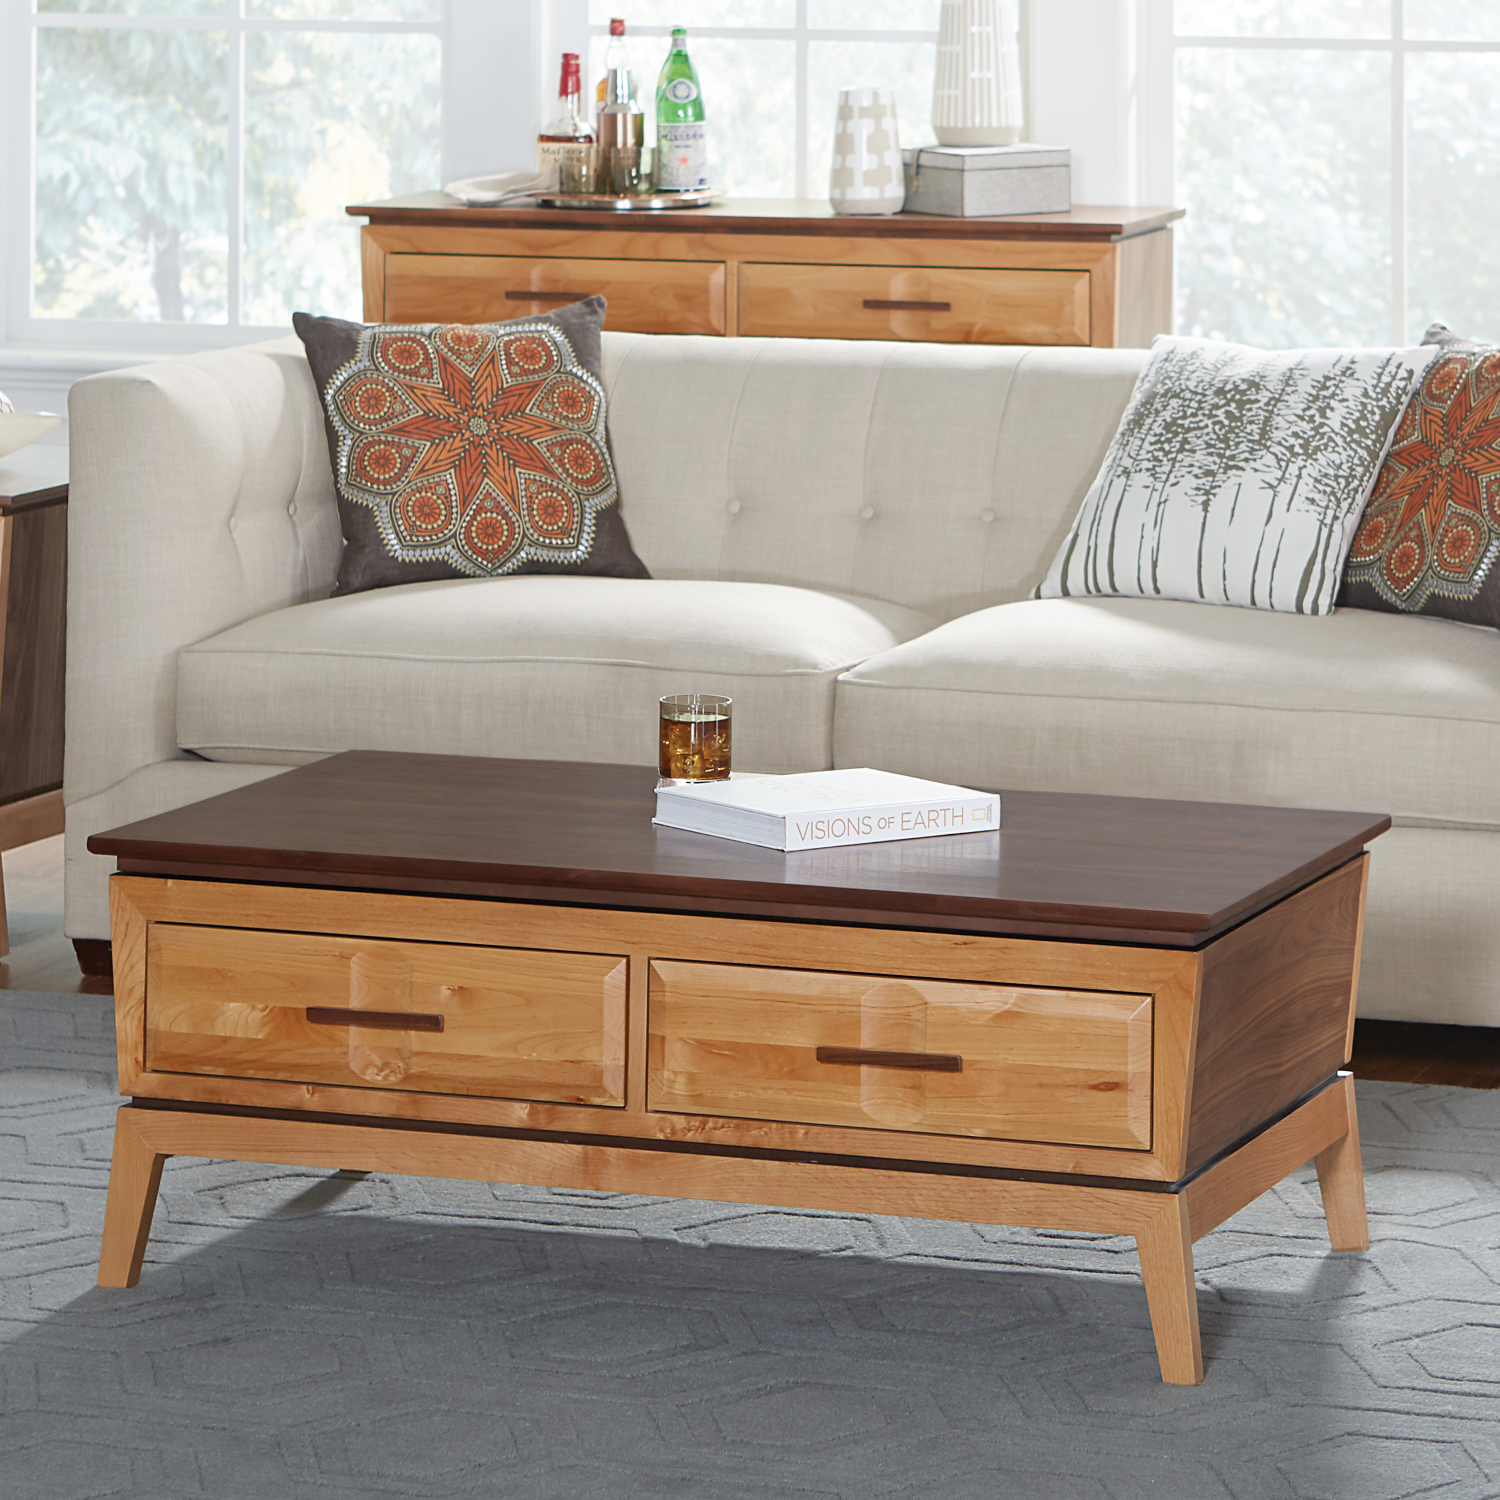 Addison Lift Top Coffee Table Lifestyle Image with Top Down Close Up